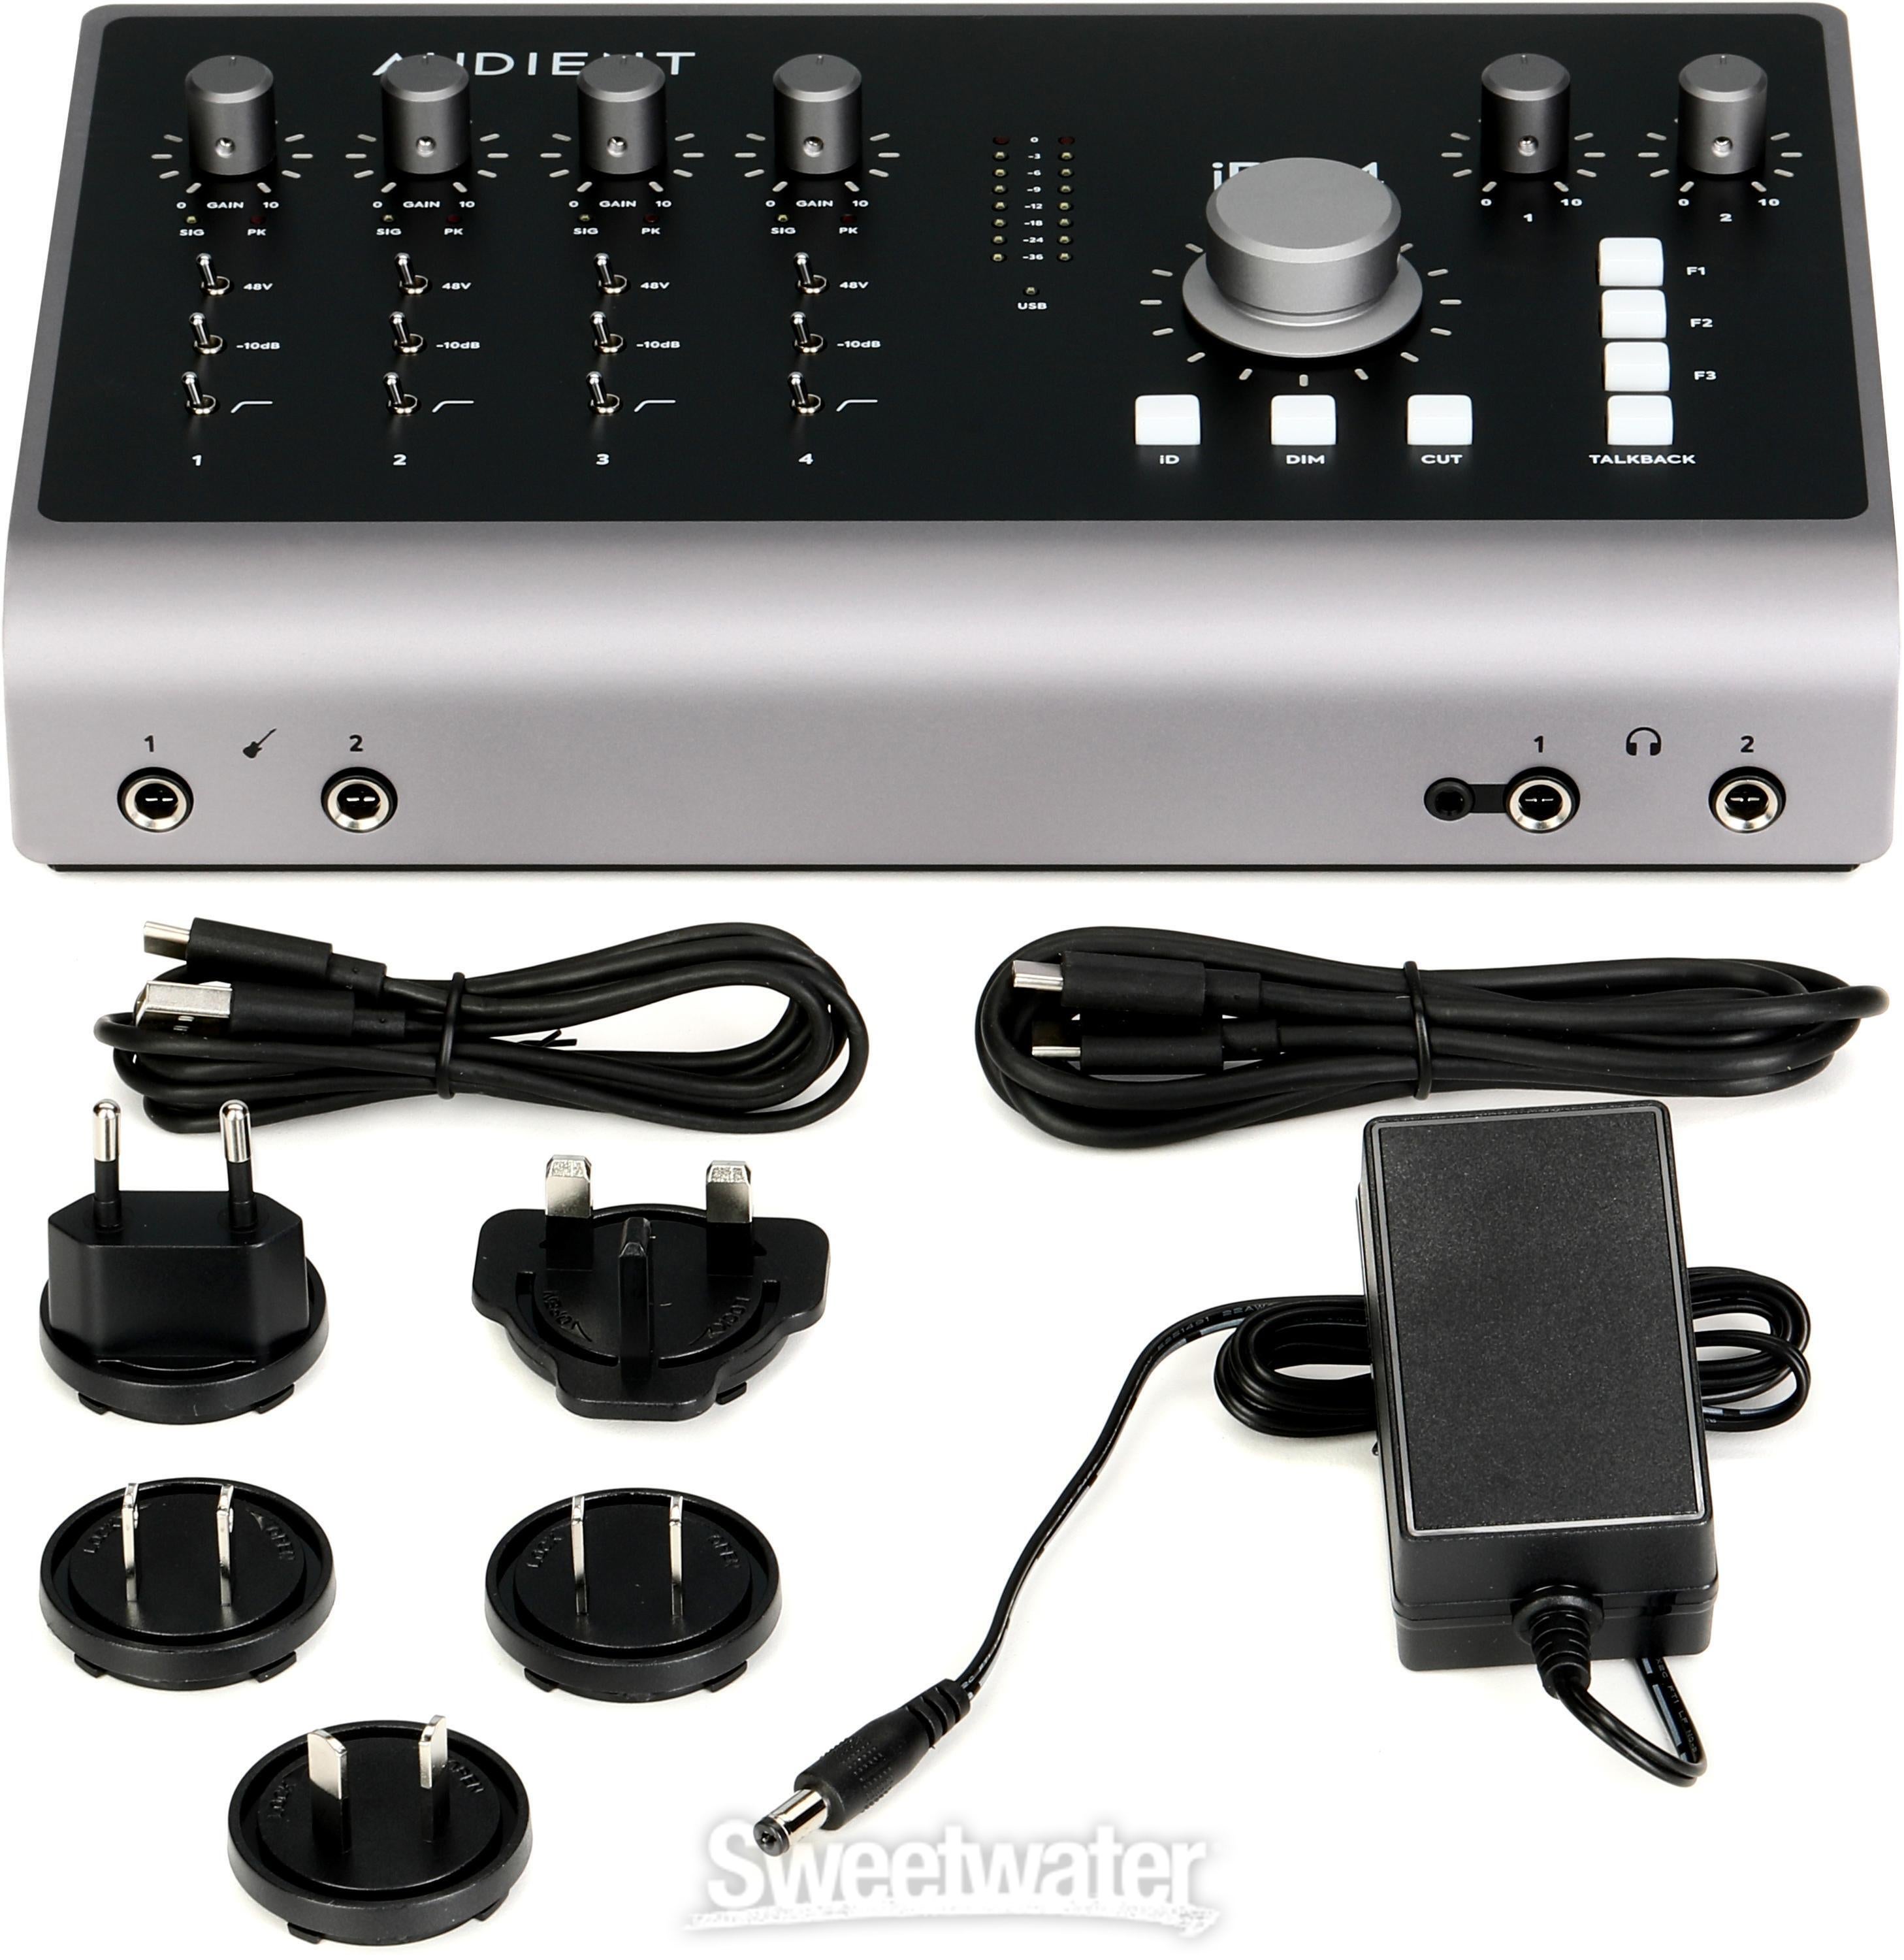 Audient iD44 MKii USB Audio Interface | Sweetwater